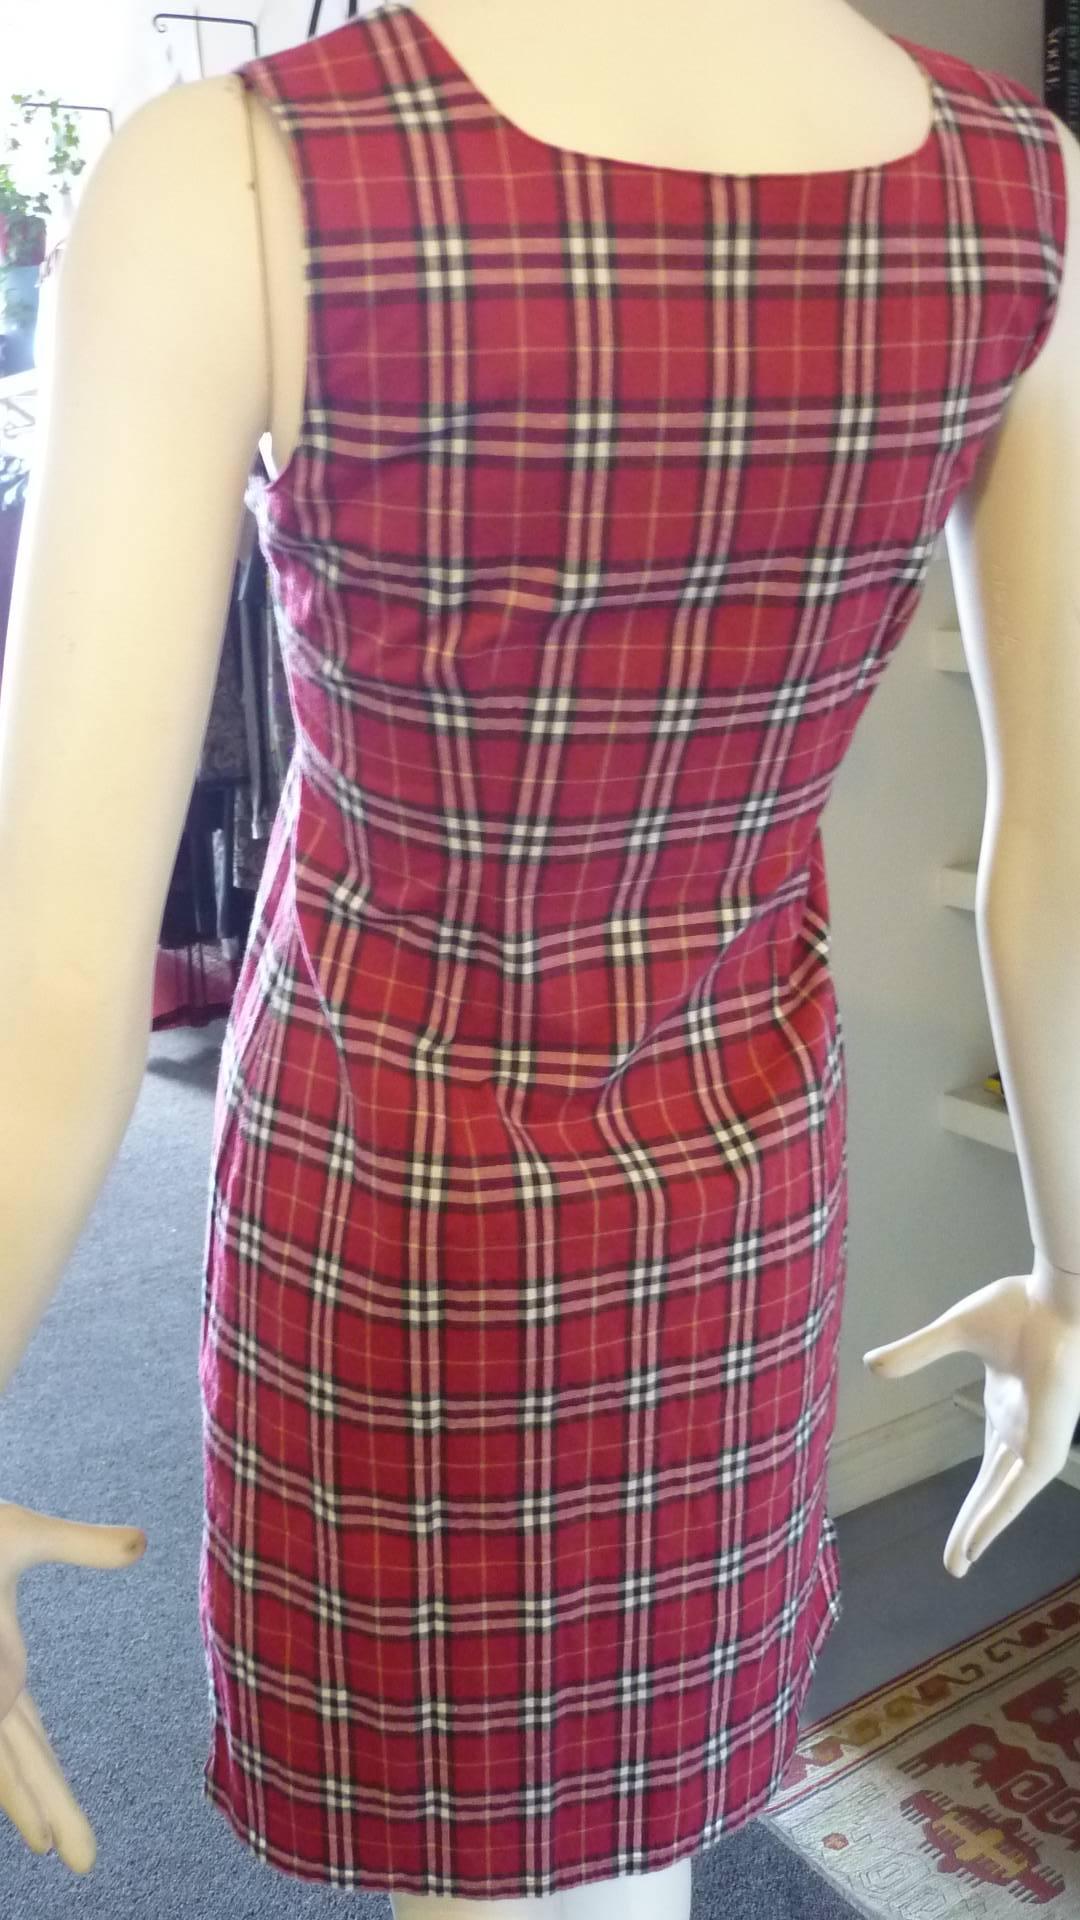 Very nice and simple square necked dress with side slits and a side zip closure.

There is some stretch to the cotton.